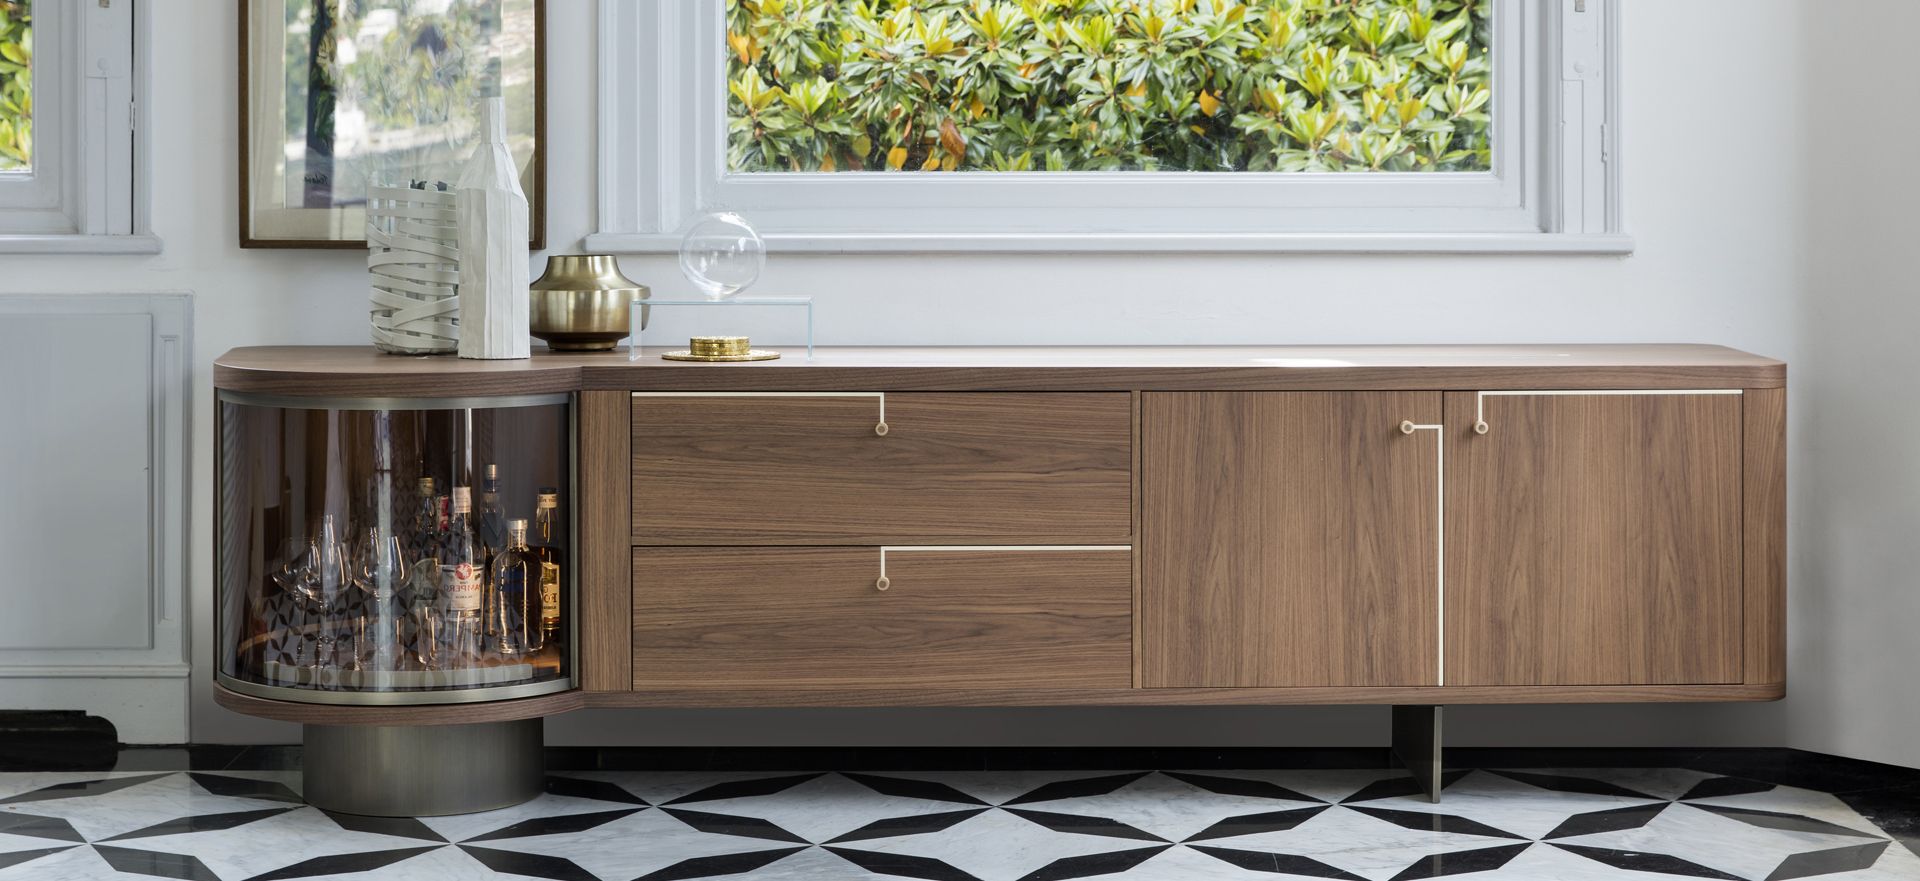 Sideboards & Cupboards | Contemporary Dining Furniture | London Pertaining To Modern And Contemporary Sideboards (Gallery 8 of 20)